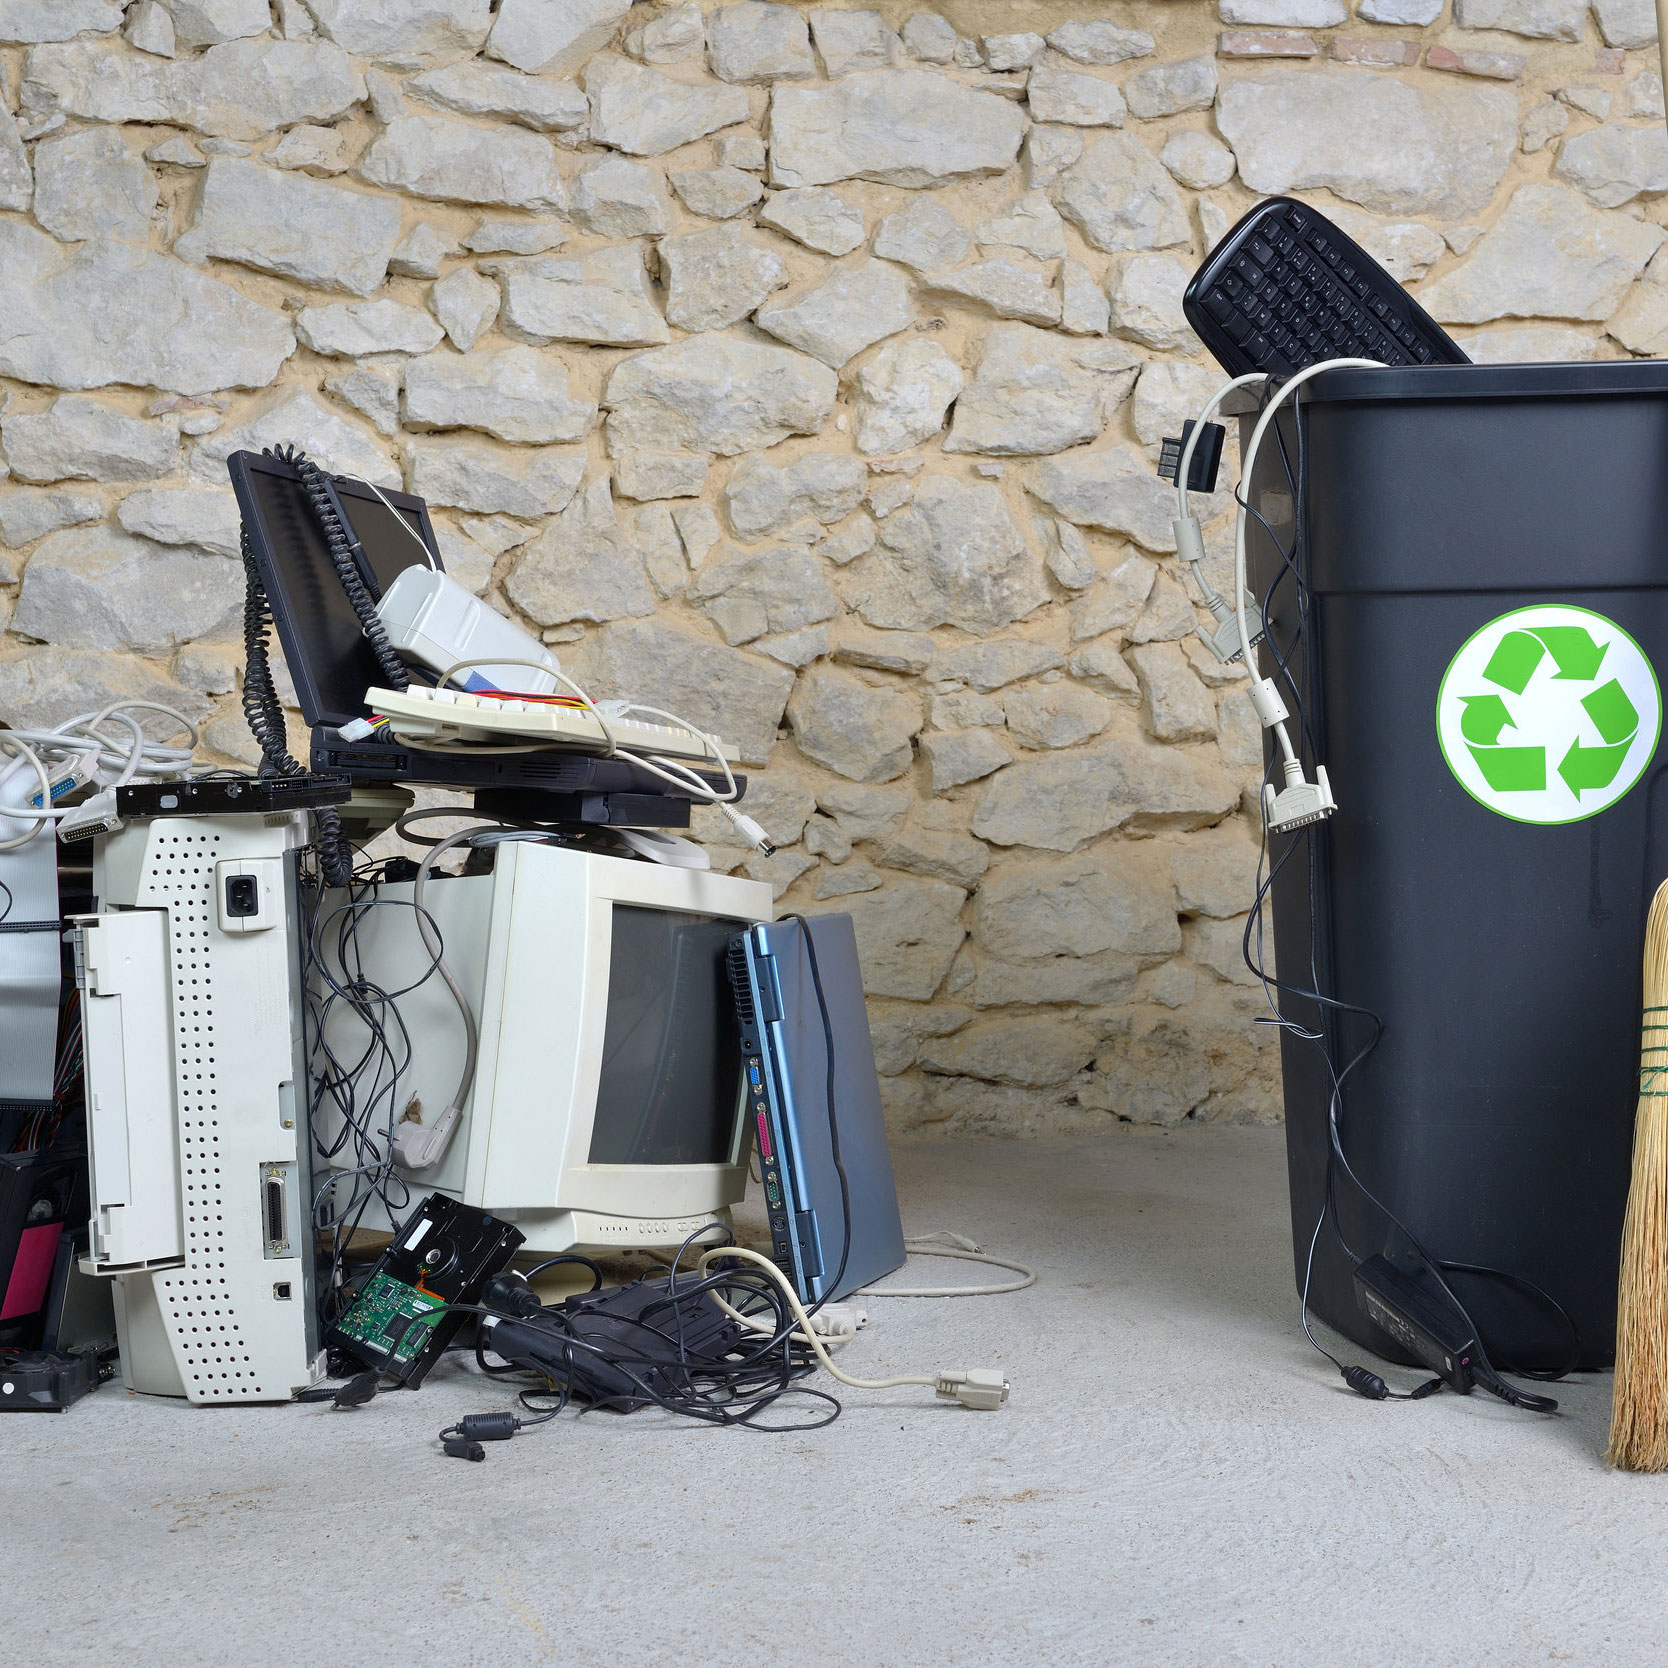 Featured image for “Why Responsible E-Waste Recycling Matters”